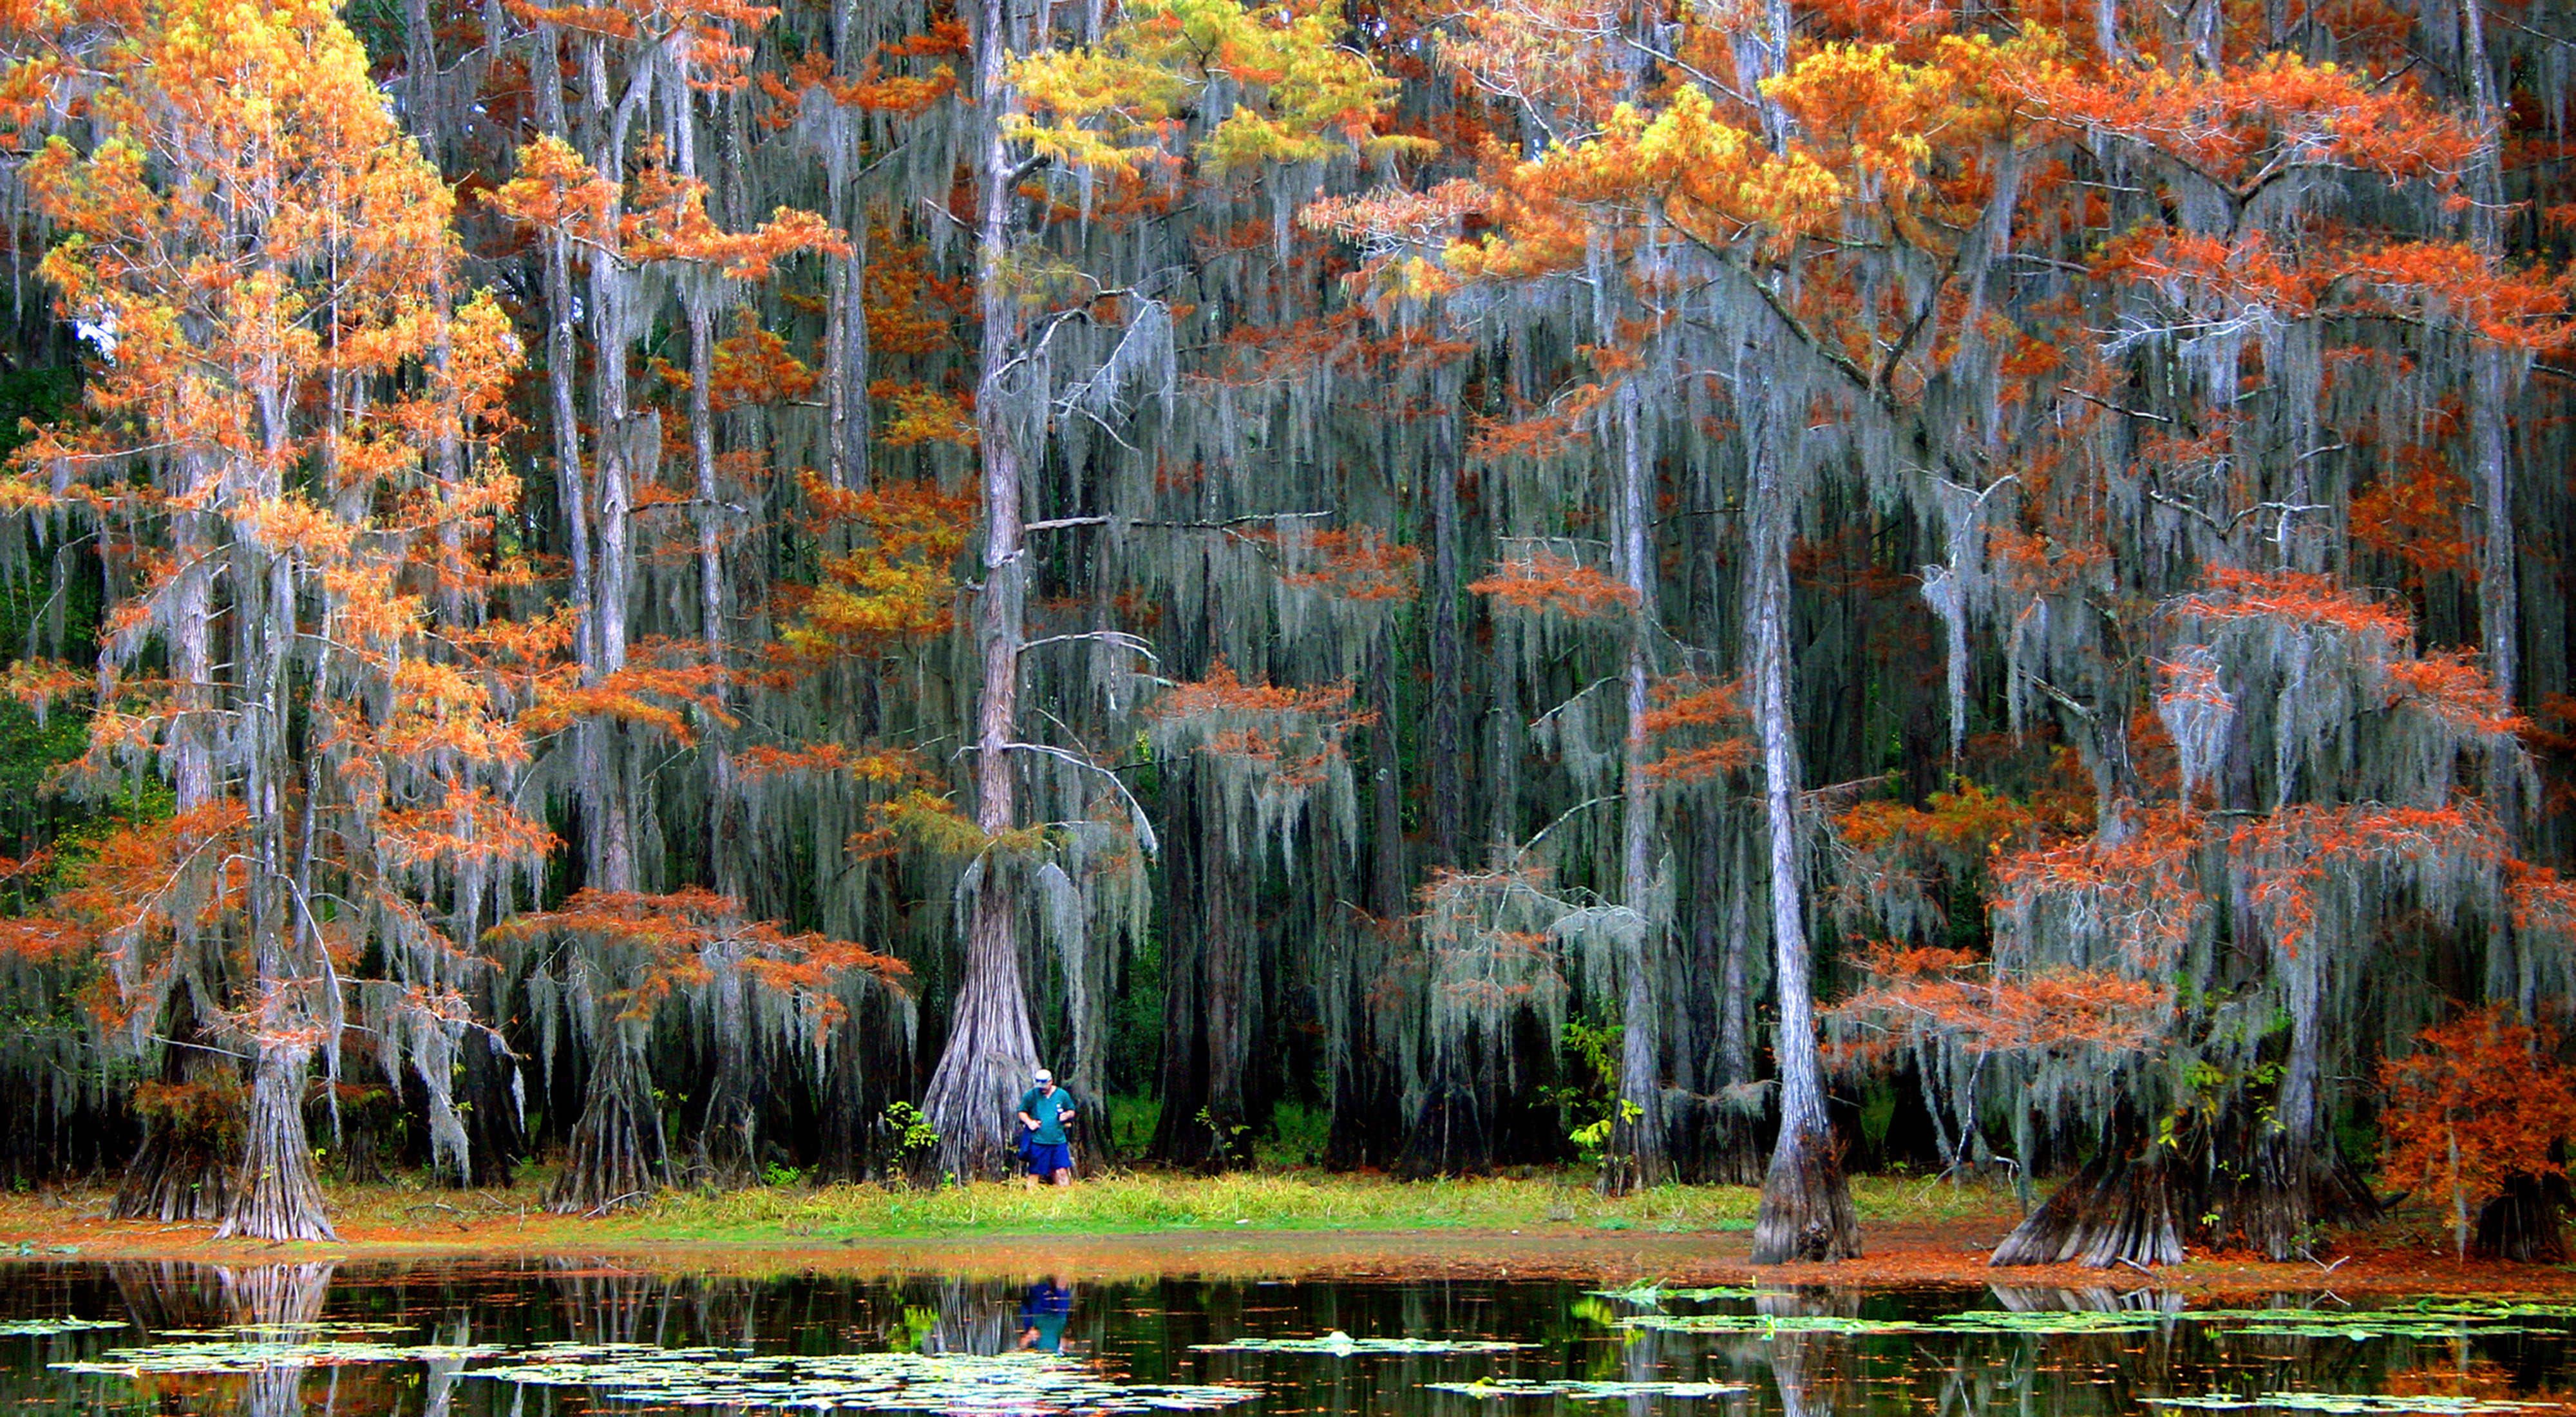 Weeping cypress trees line a lake with bright red and orange leaves.